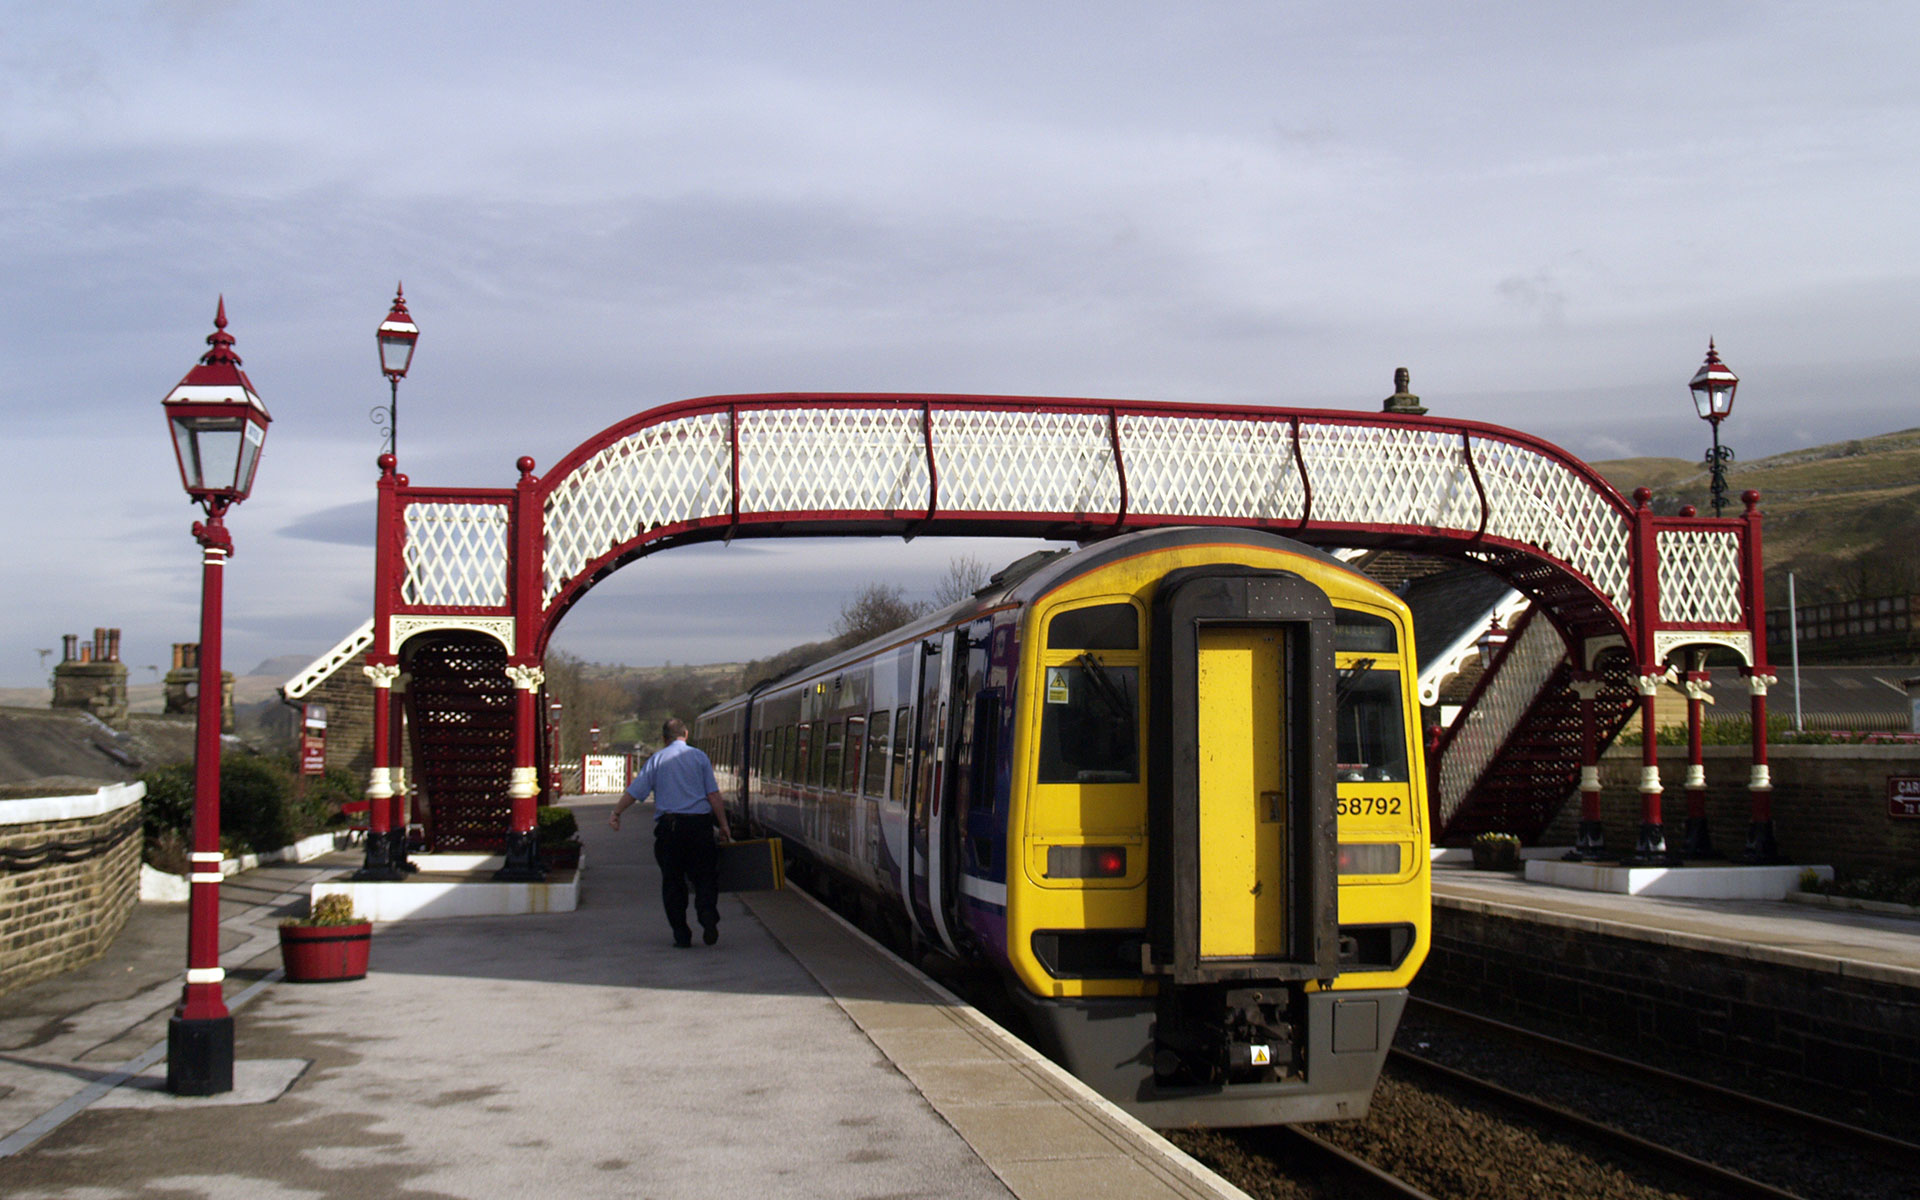 A northbound Northern Rail service pauses at Settle en route to Carlisle (photo © hidden europe).